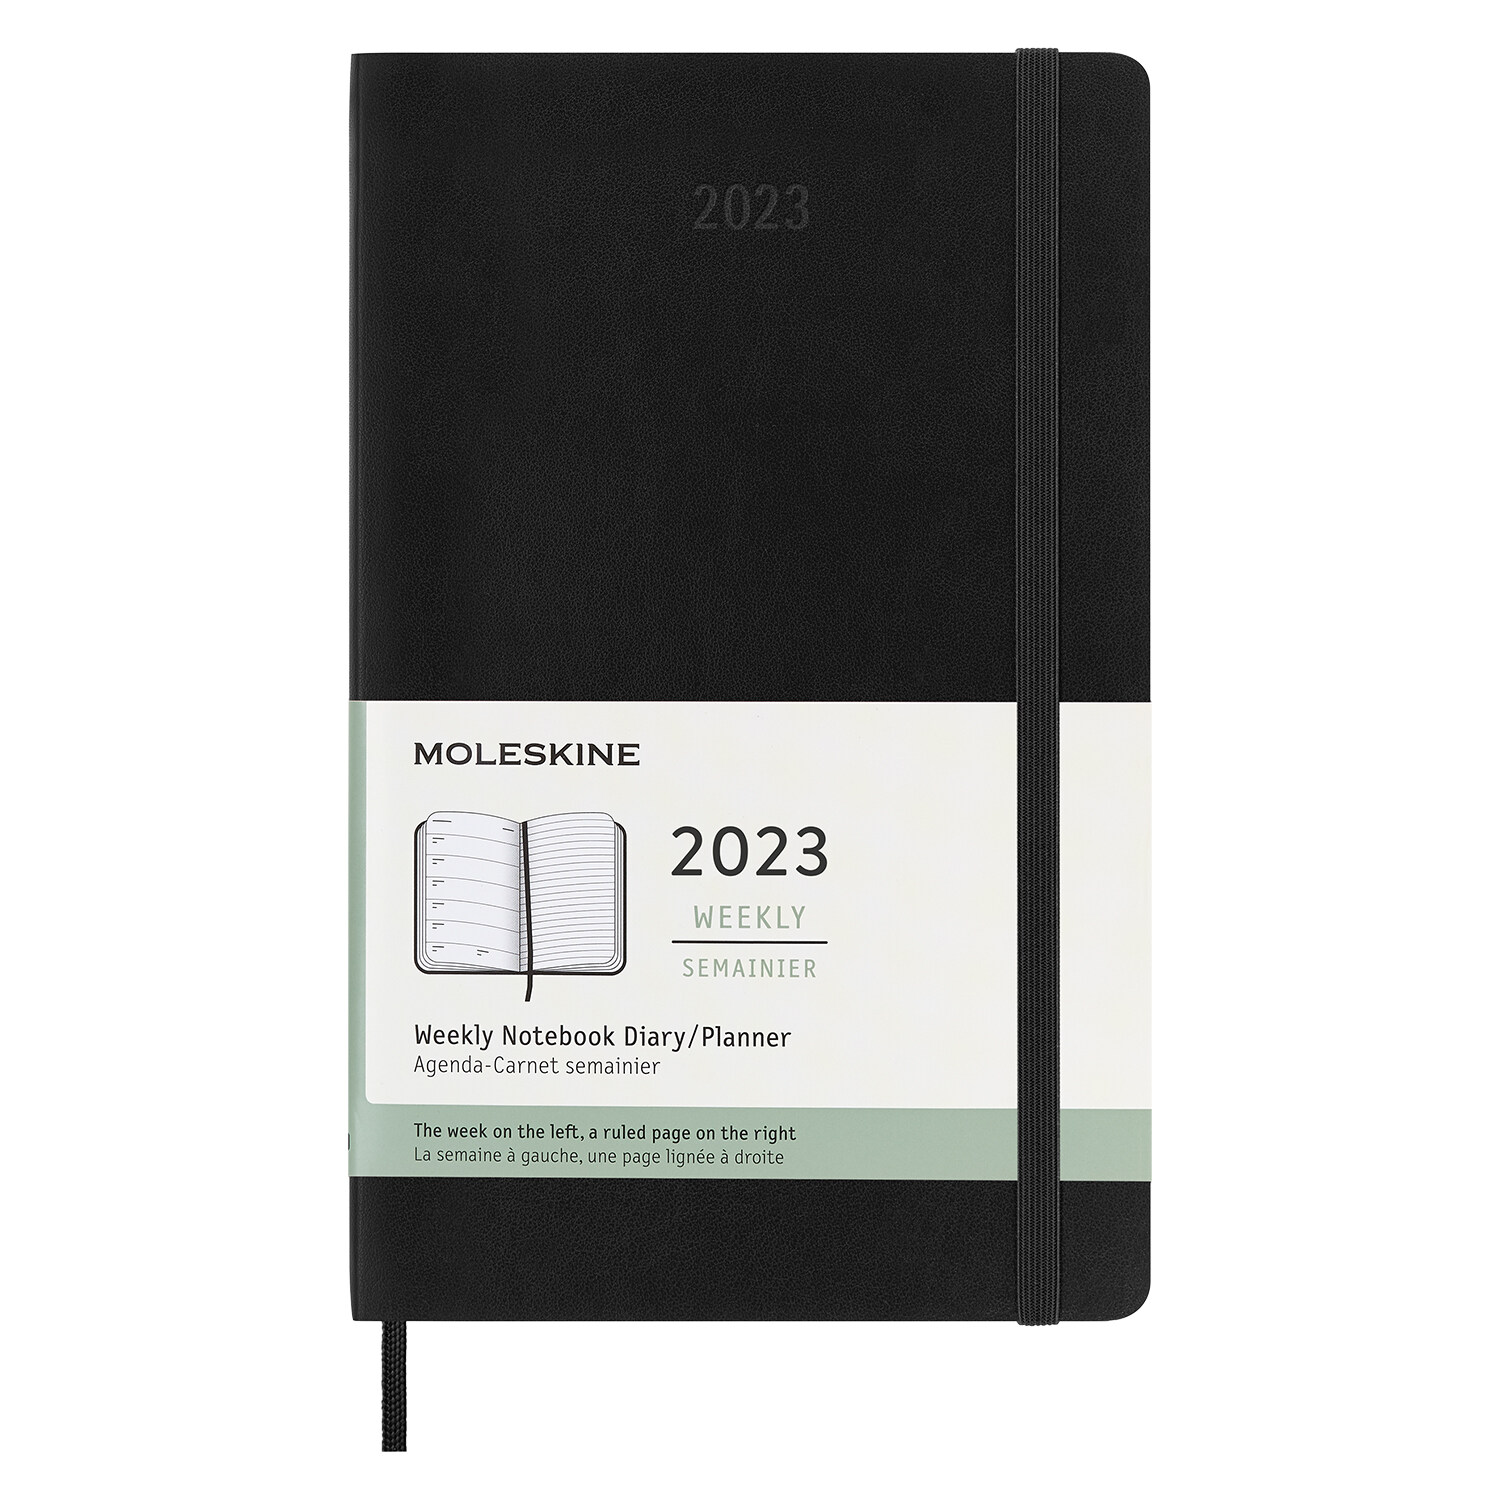 Moleskine 2023 Weekly Notebook Planner, 12m, Large, Black, Soft Cover (5 X 8.25) (Other)